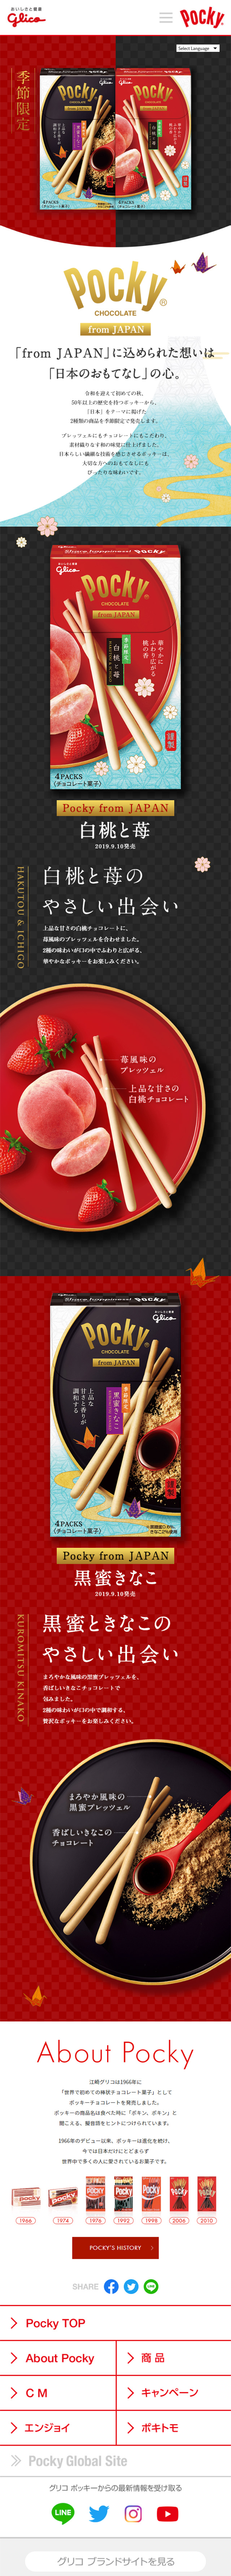 Pocky from Japan_sp_1